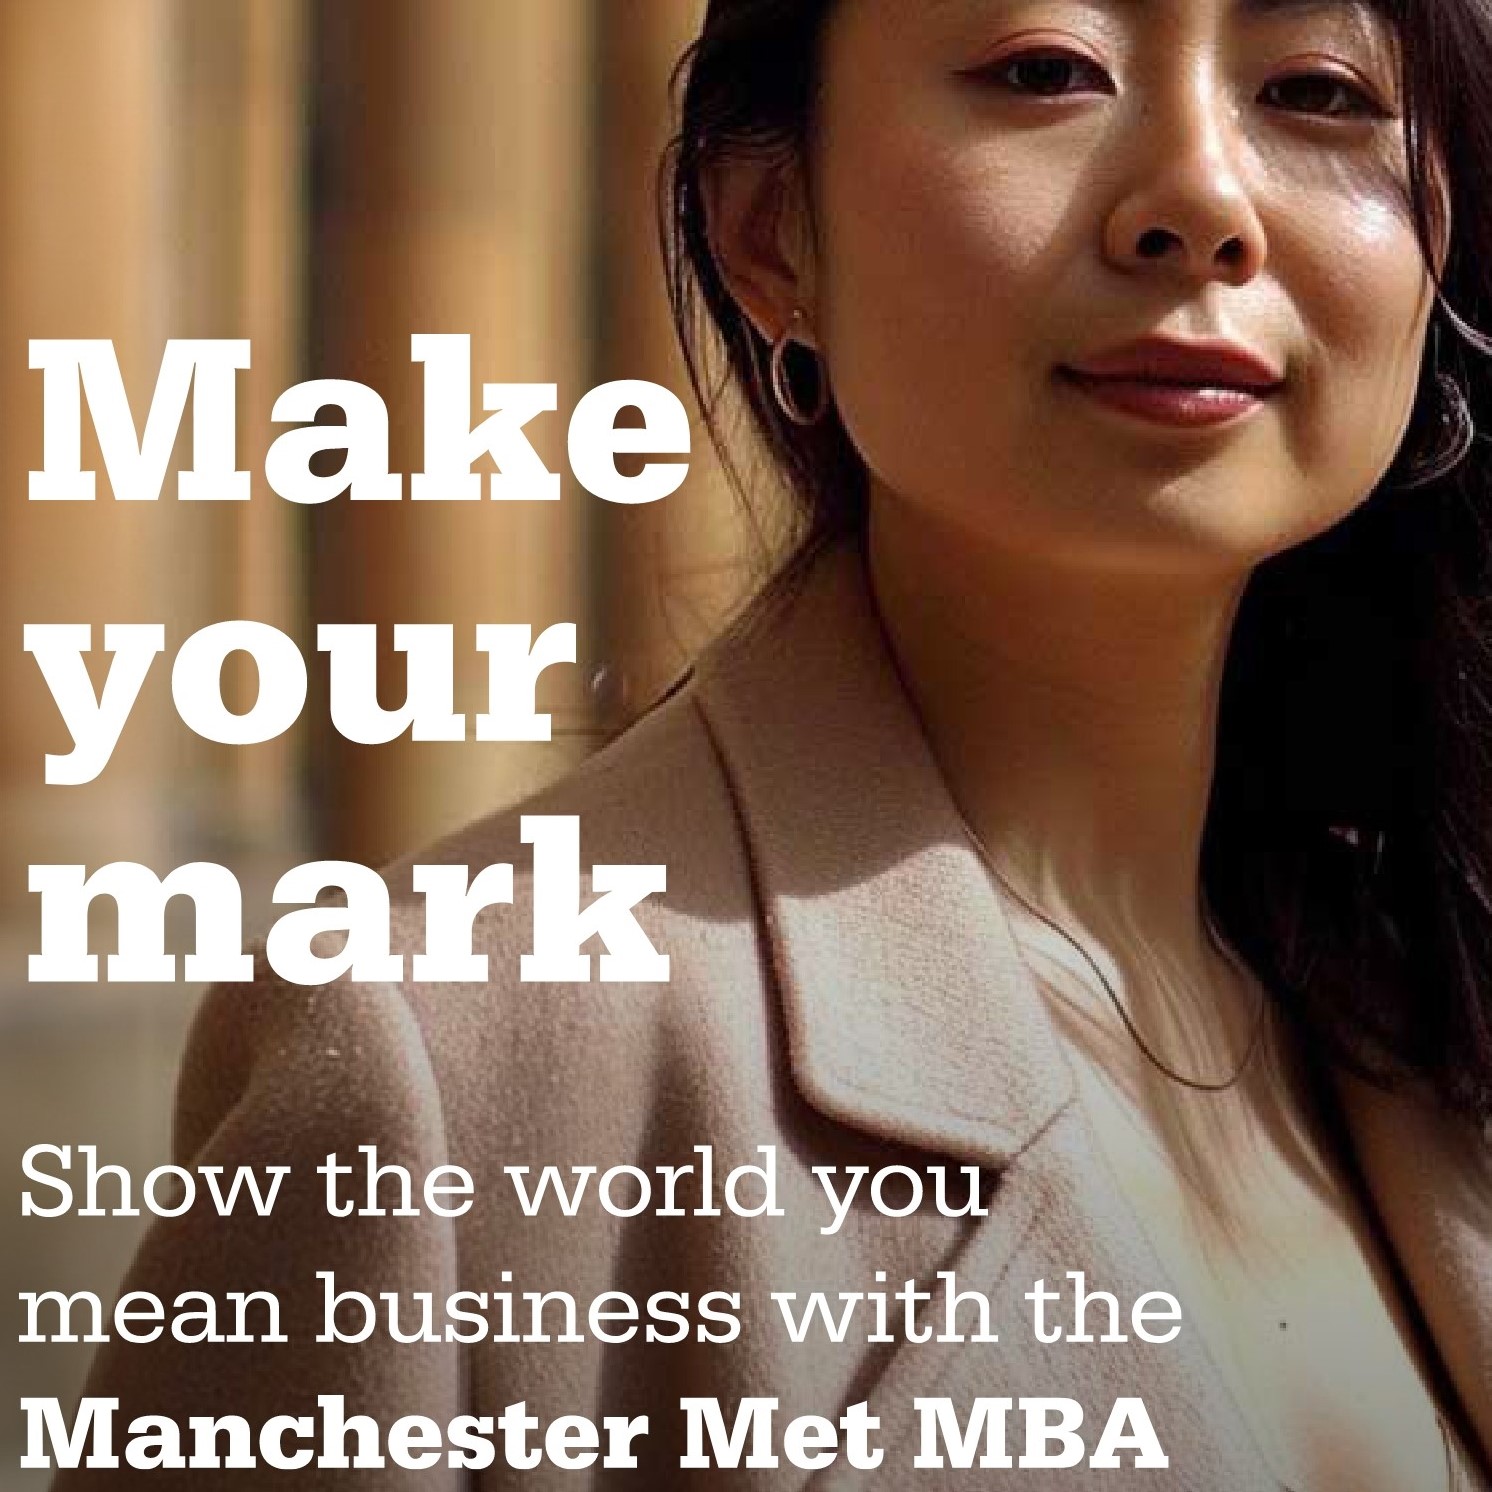 Manchester Metropolitan University launches new MBA programme for responsible leadership